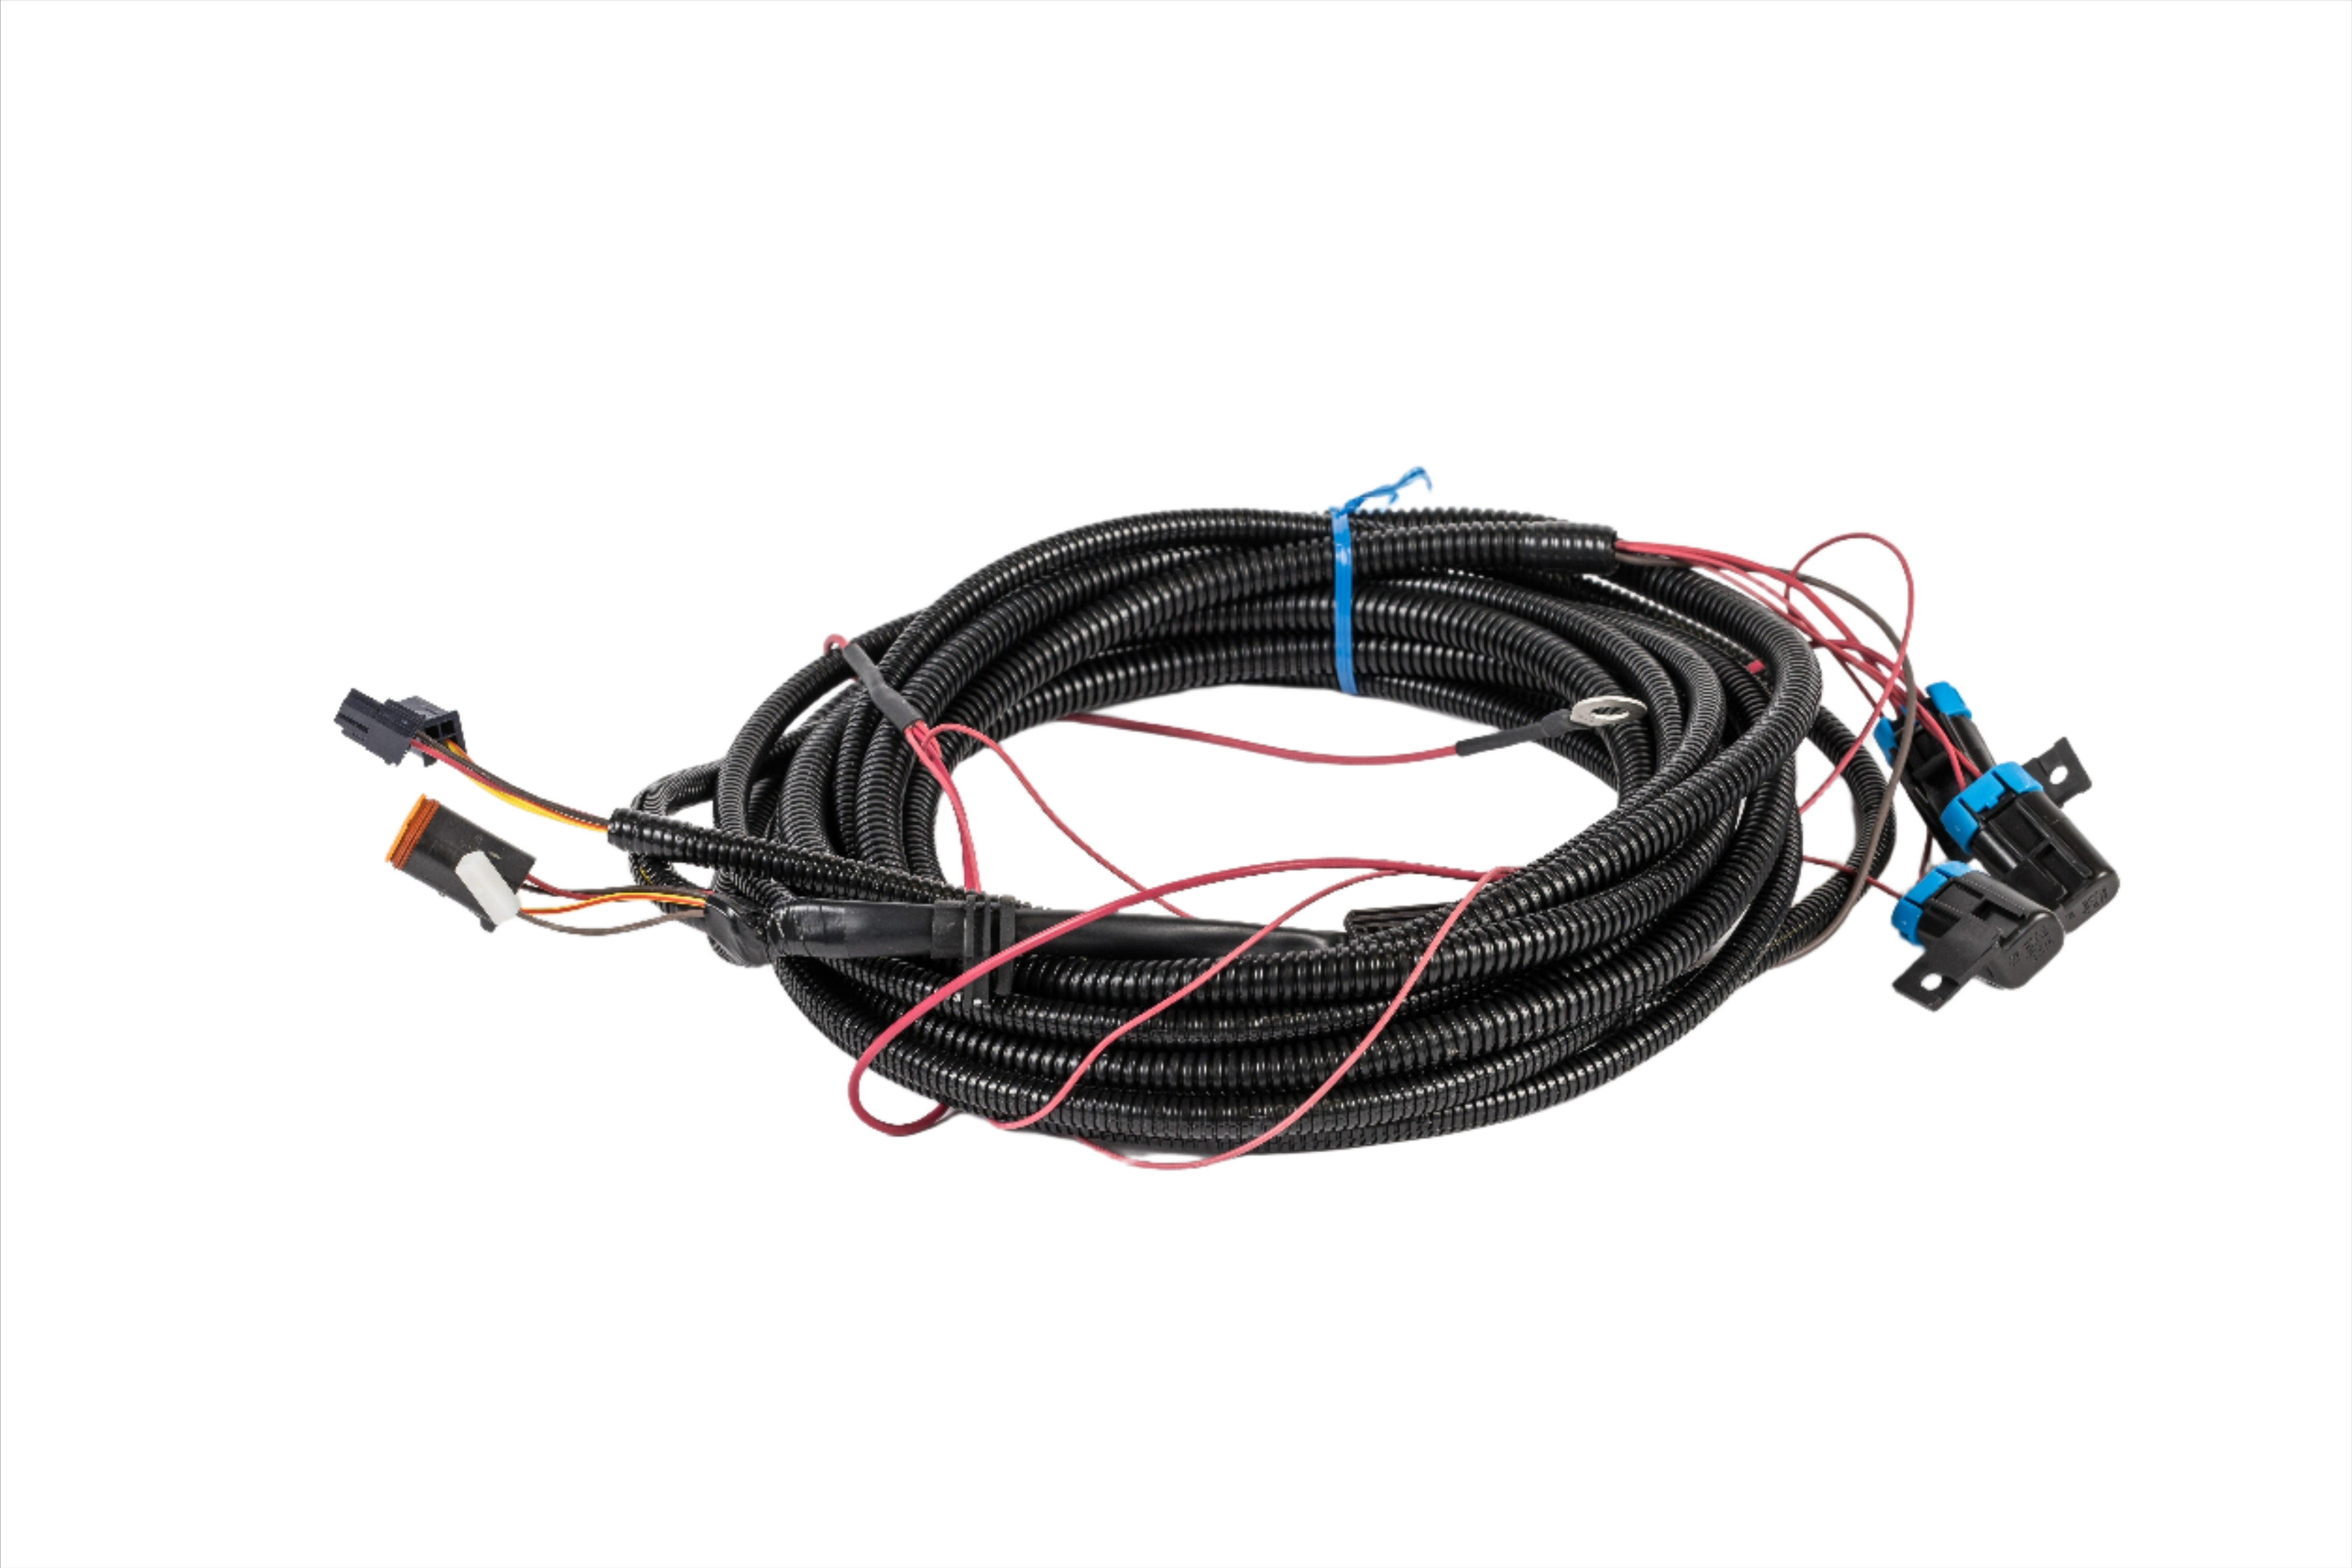 Webasto Wiring Harness Complete For Smartemp 3.0 Airtop 2000Stc 5013887A Heater Part